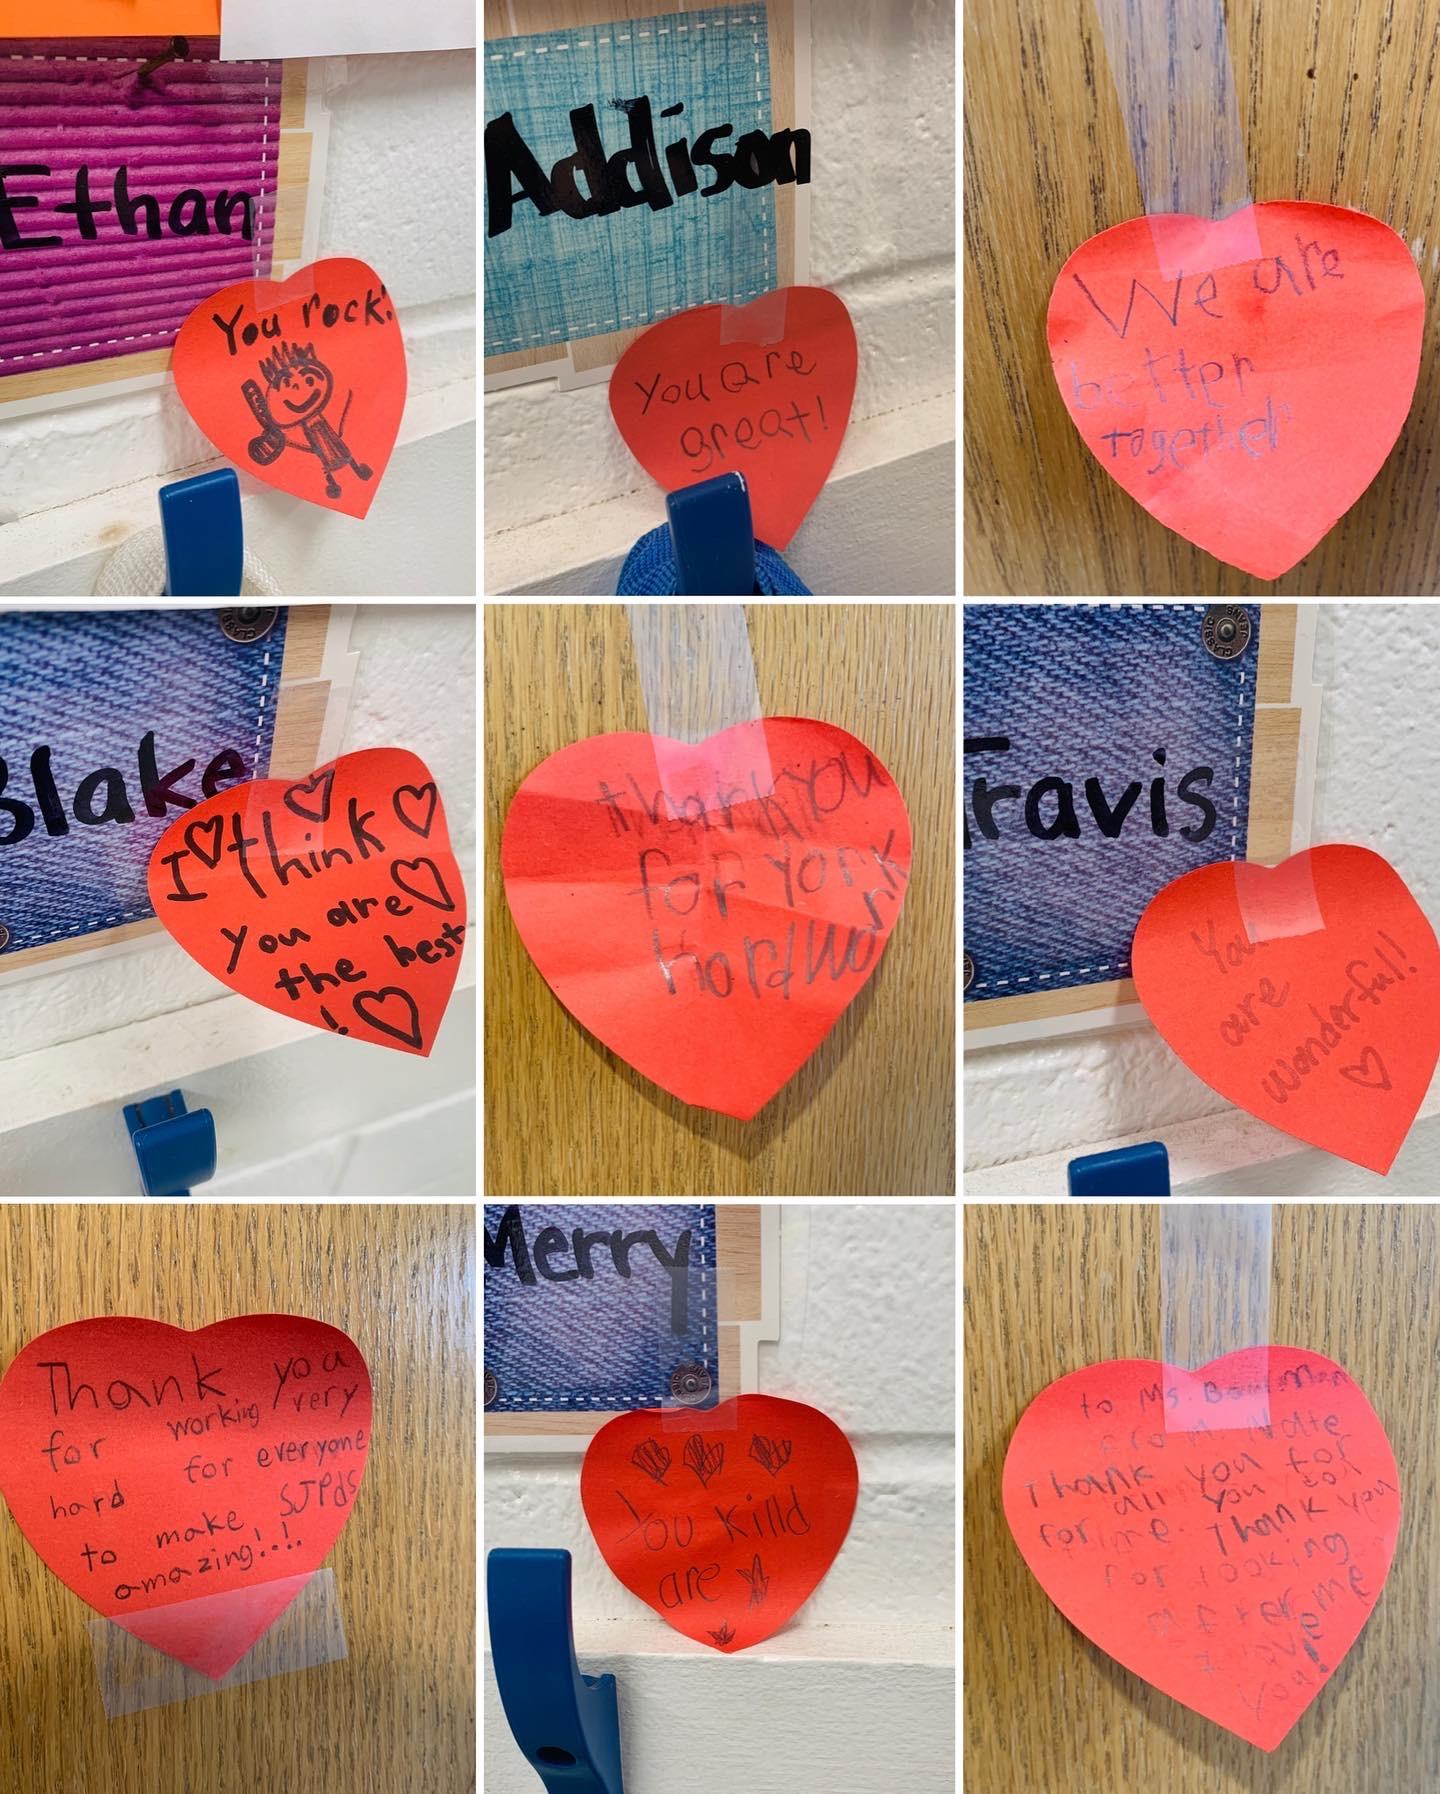 collage of heart post it notes with kind messages written on them by students